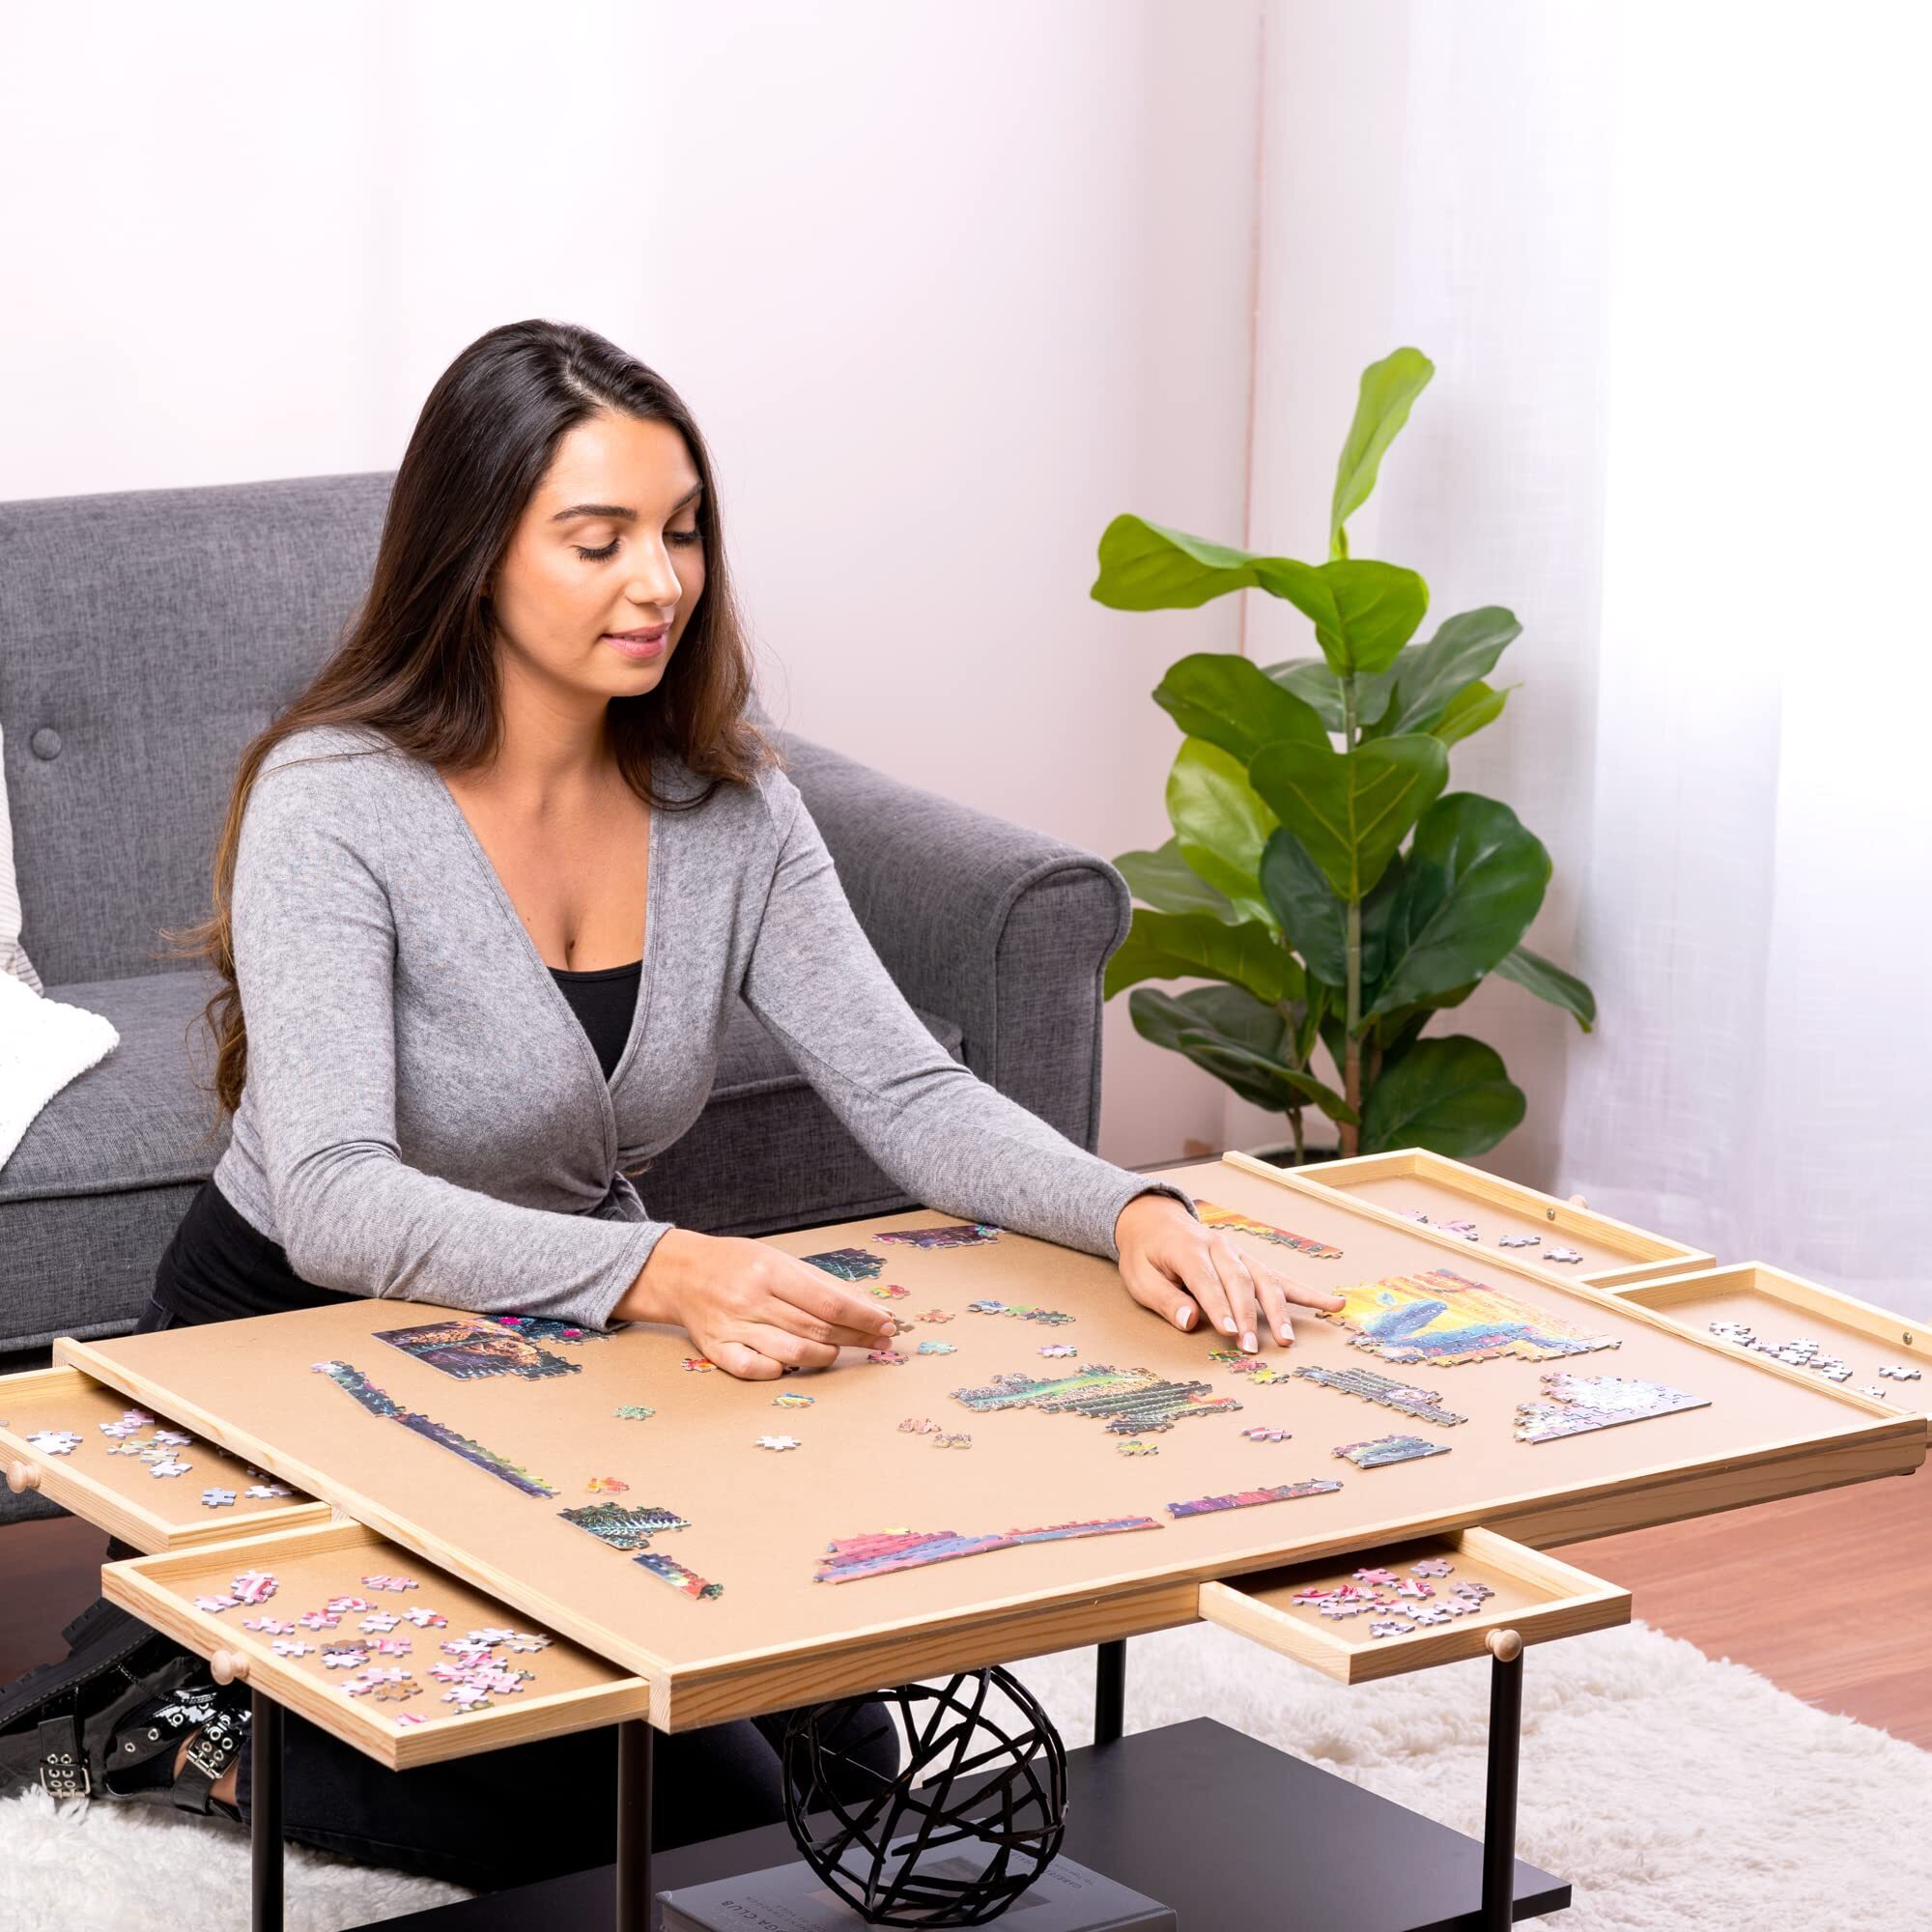 1500 Piece Wooden Jigsaw Puzzle Table - 6 Drawers, 9 Glue Sheets & 3 Hangers | 27” X 35” Jigsaw Puzzle Board Portable - Portable Puzzle Table for Teens and Adults